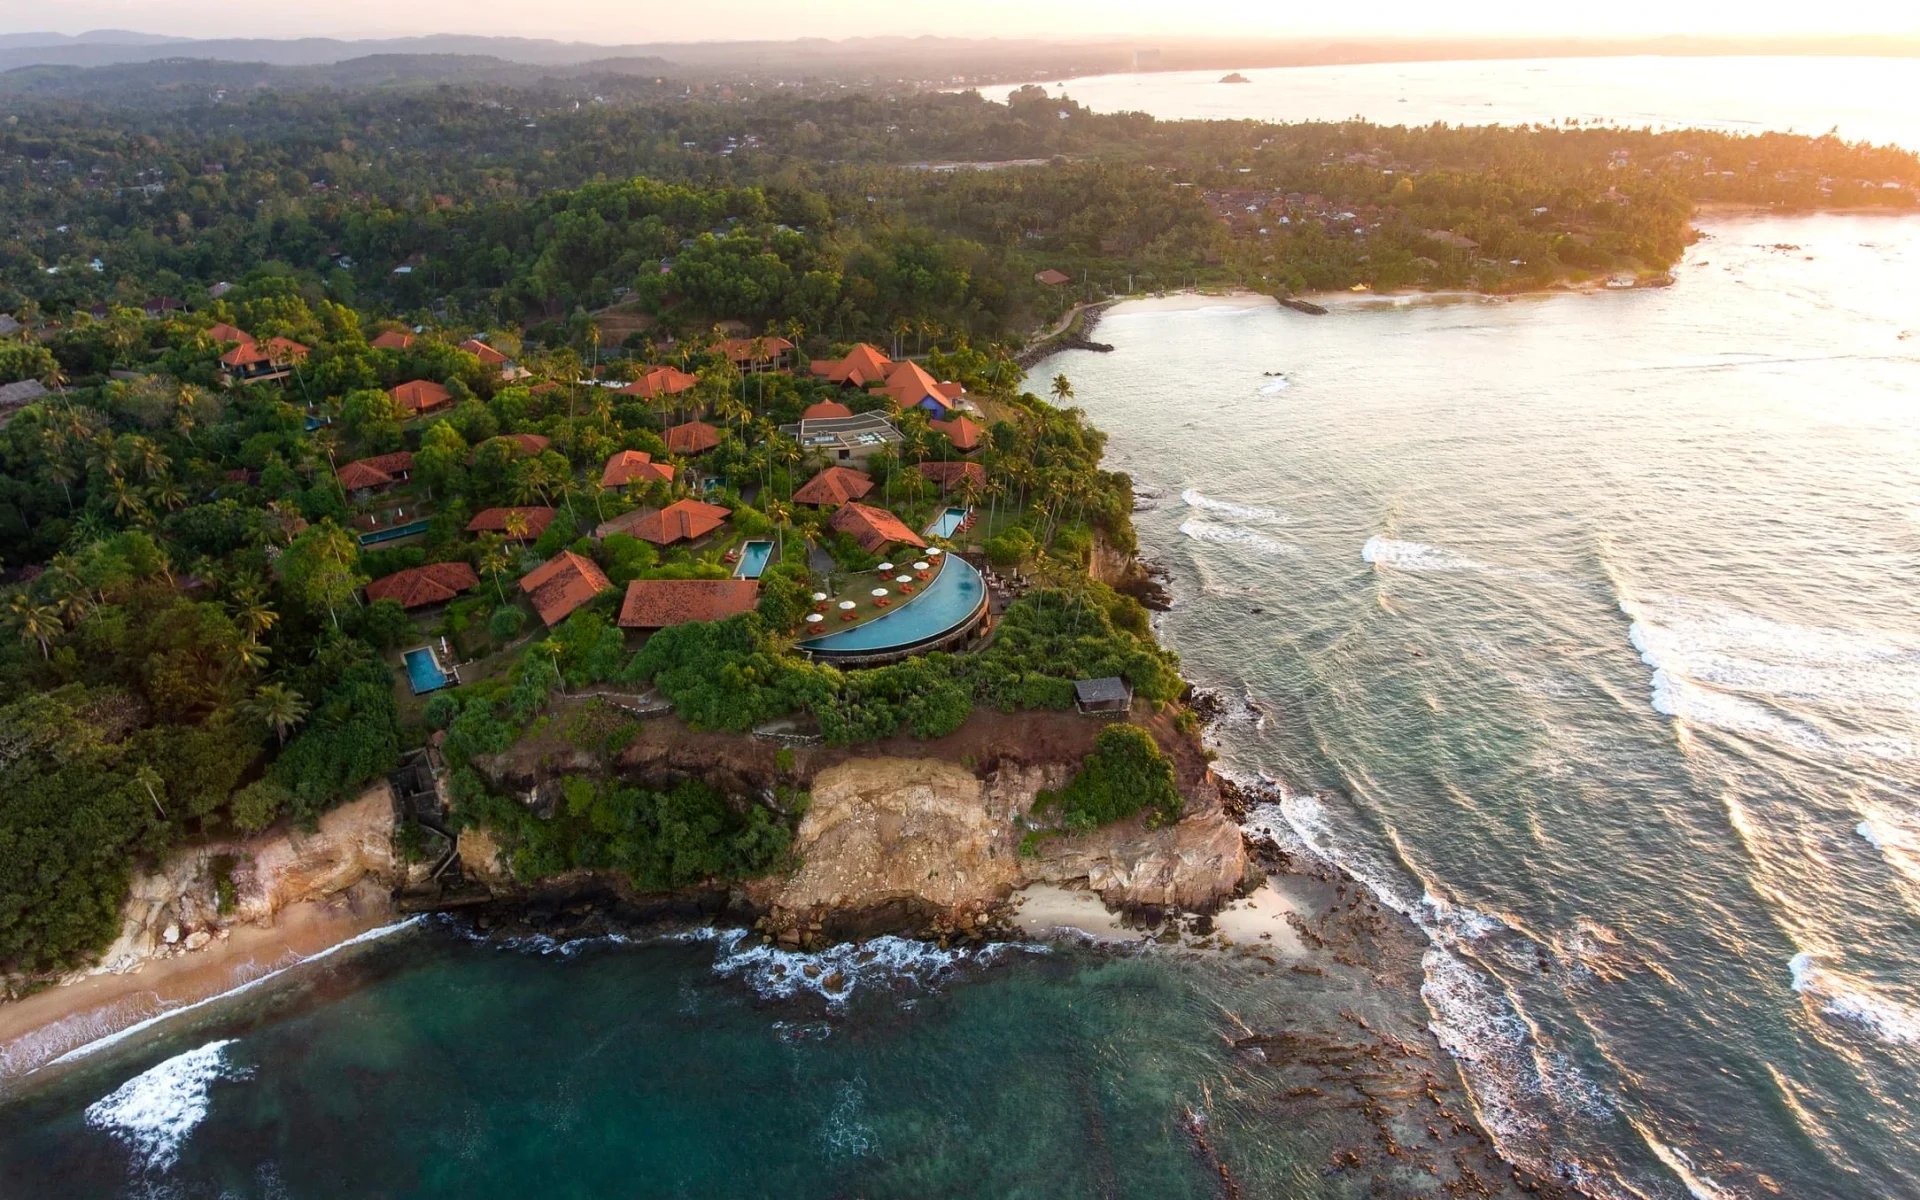 Cape Weligama is situated on a cliff by the sea. 